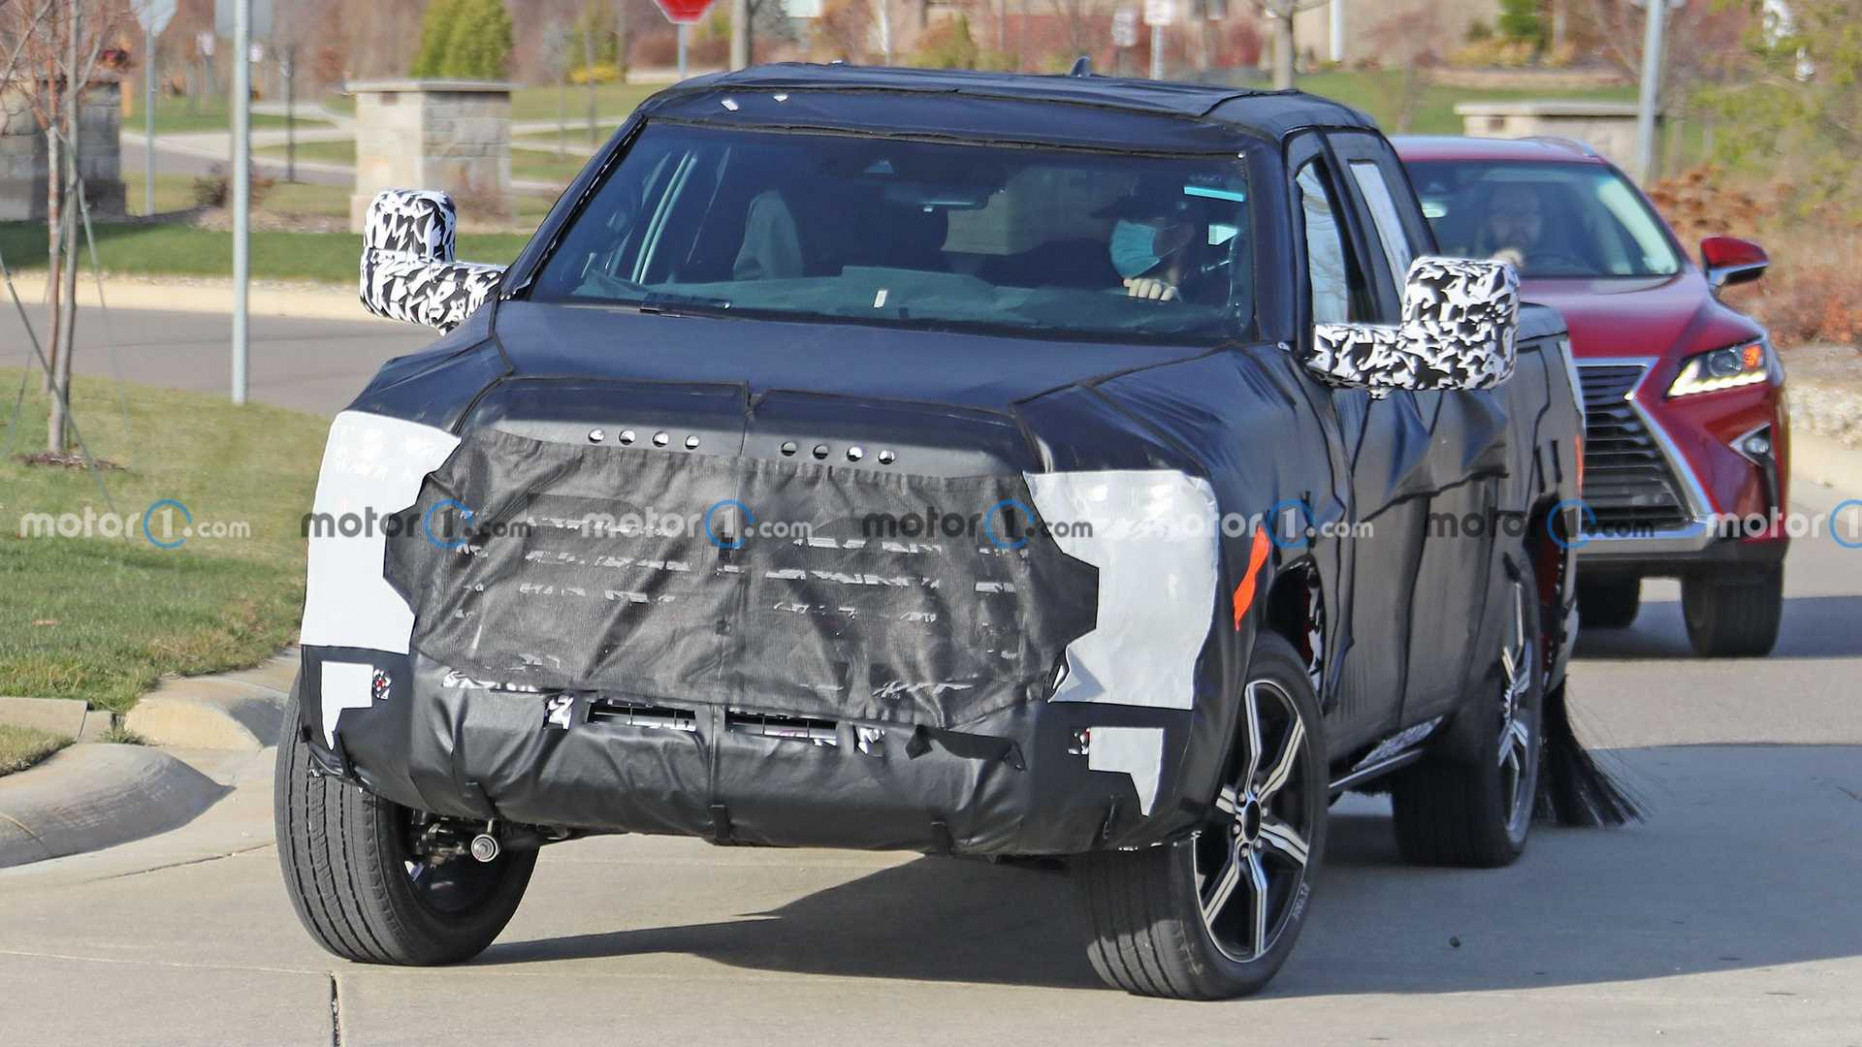 4 Toyota Tundra Spied Offering Best View Yet At New Truck 2022 Toyota Tundra Spy Photos